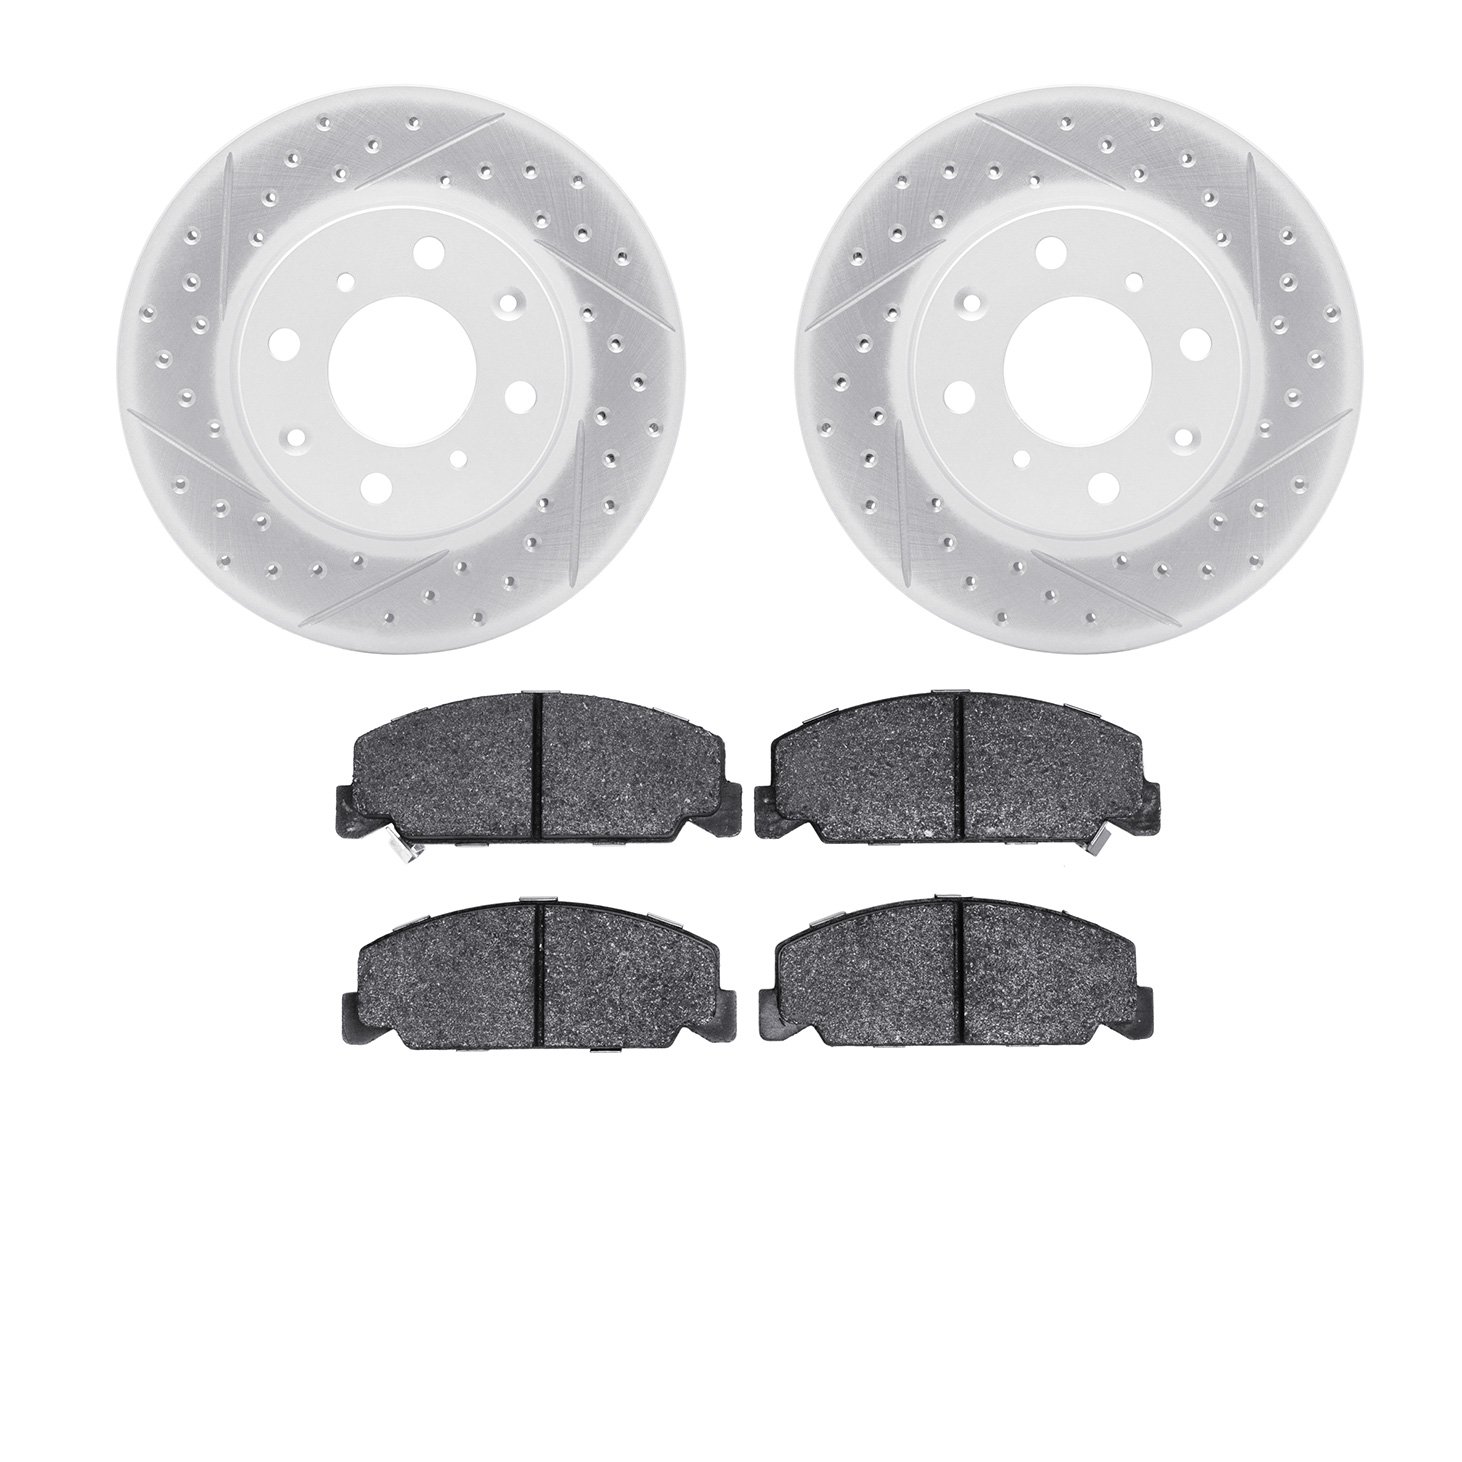 2502-59015 Geoperformance Drilled/Slotted Rotors w/5000 Advanced Brake Pads Kit, 1990-2000 Acura/Honda, Position: Front